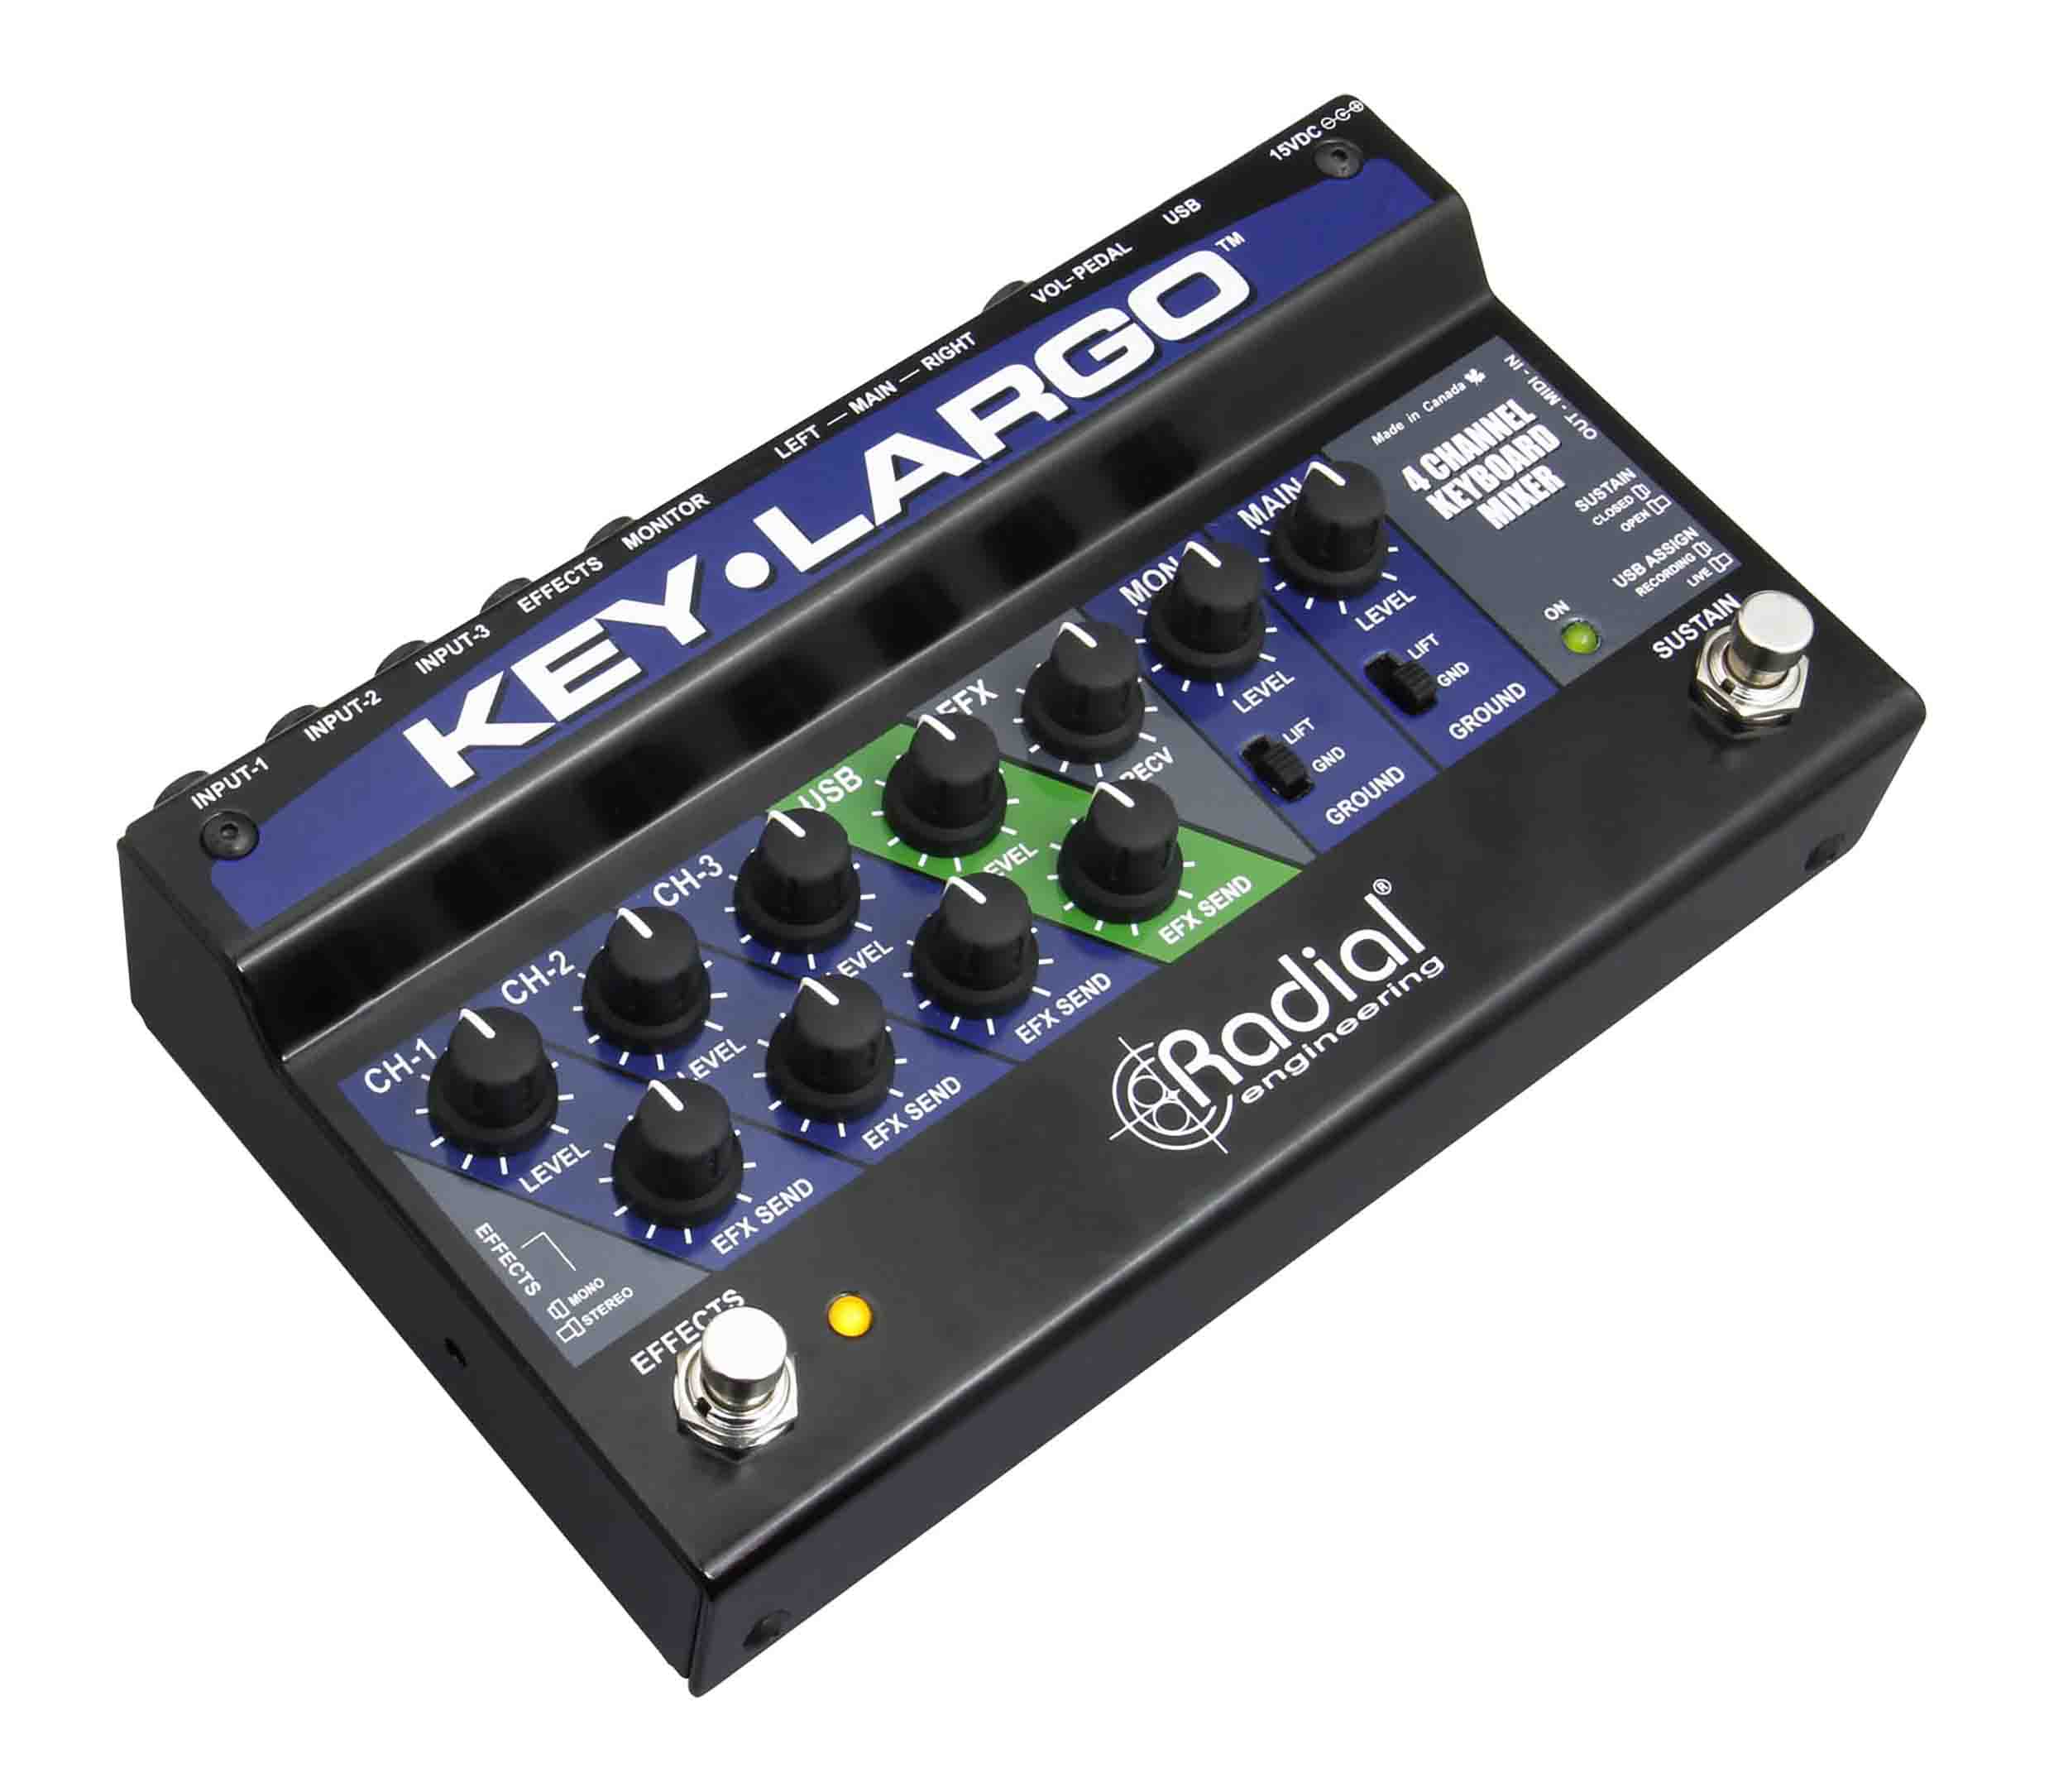 Radial Engineering Key-Largo Keyboard Mixer and Performance Pedal by Radial Engineering